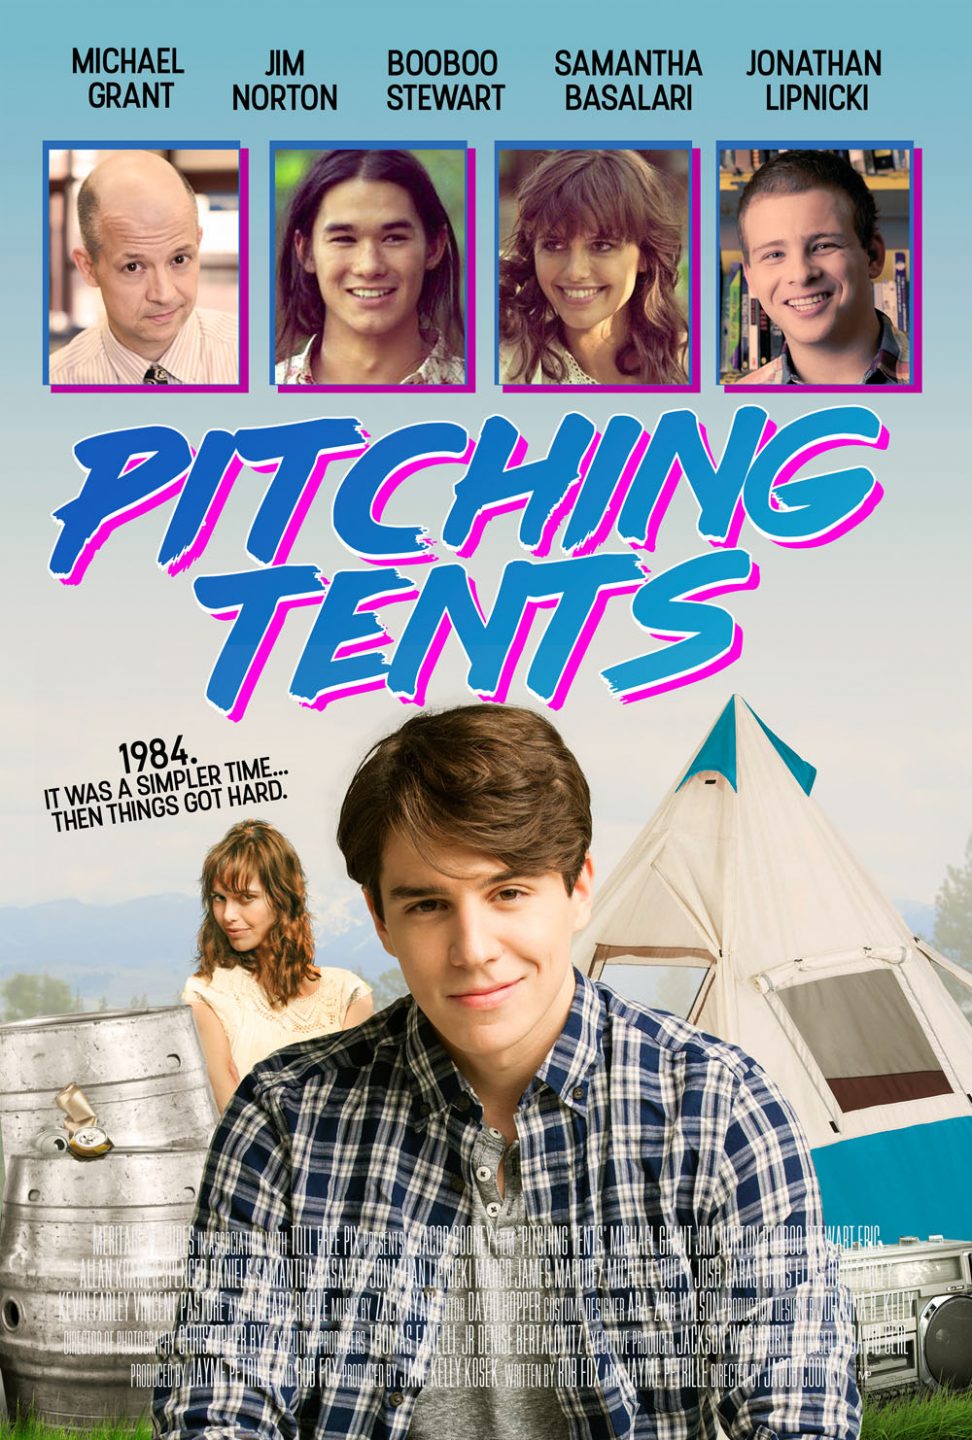 Pitching Tents poster (Meritage Pictures)